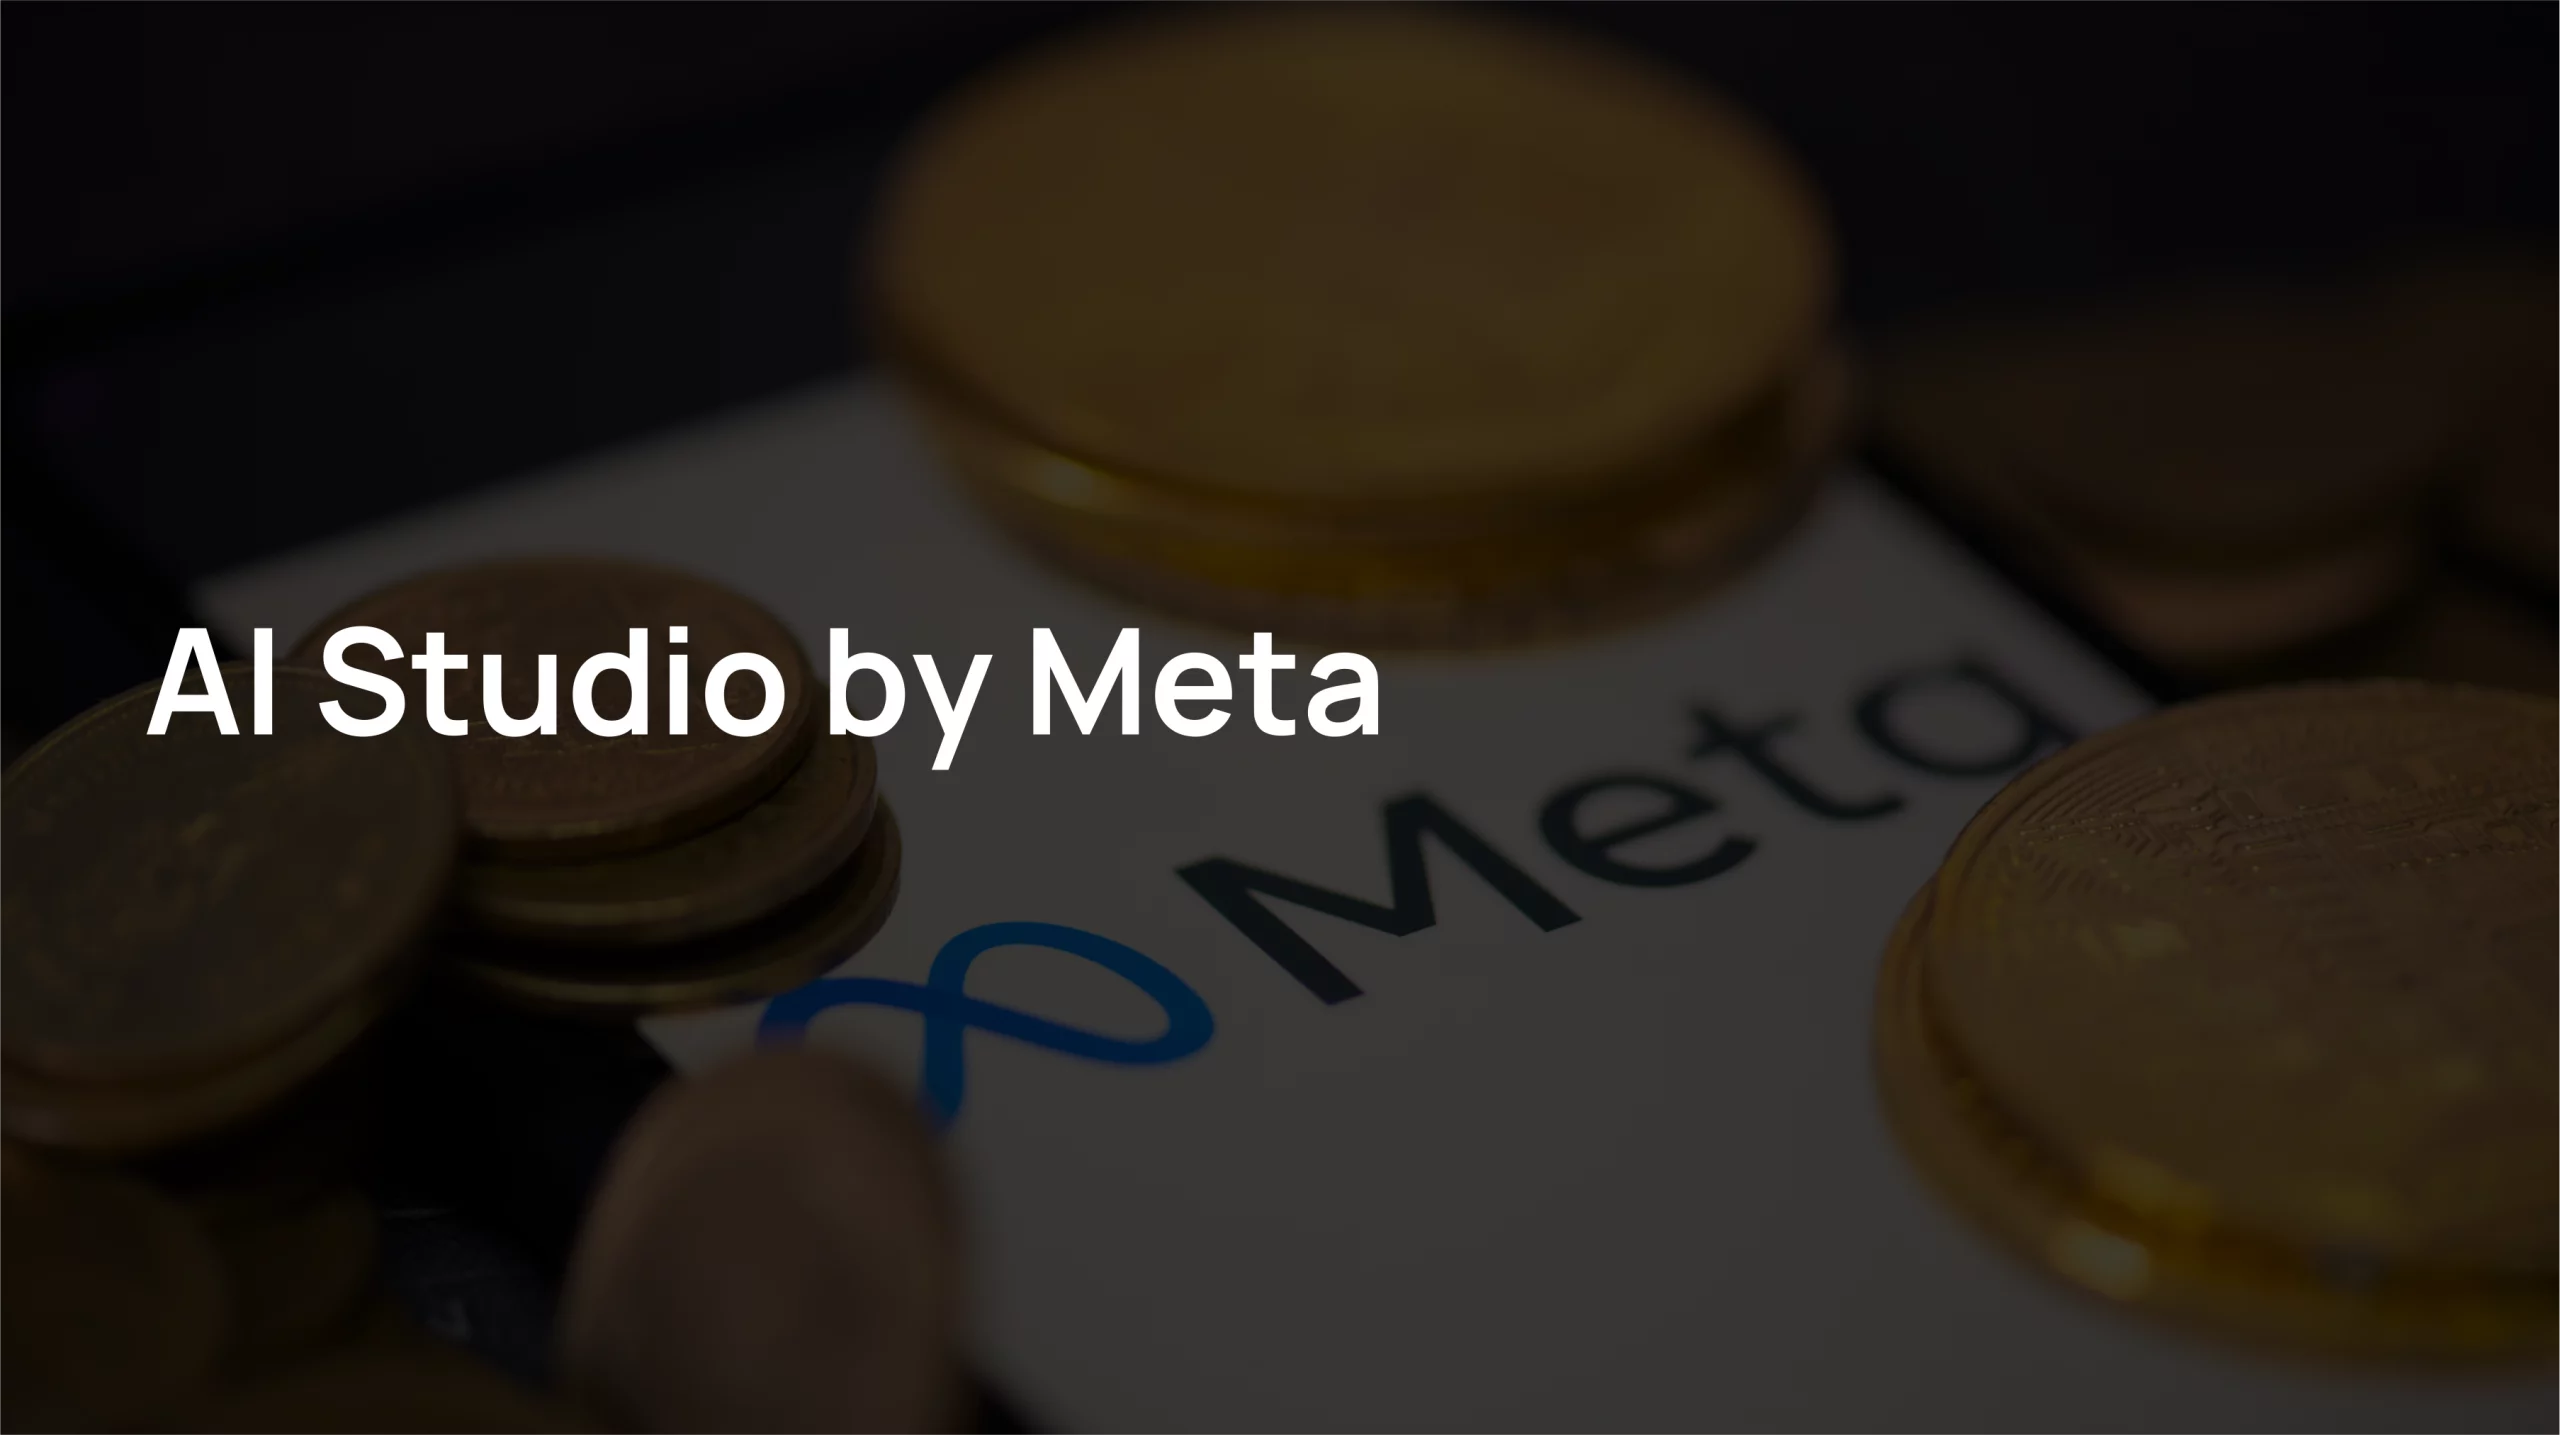 With AI Studio's advanced capabilities addressing a range of chatbot requirements, coupled with the sandbox tool, Meta's efforts toward making AI accessible for all can be expected to transform the chatbot arena for professional and personal usage.